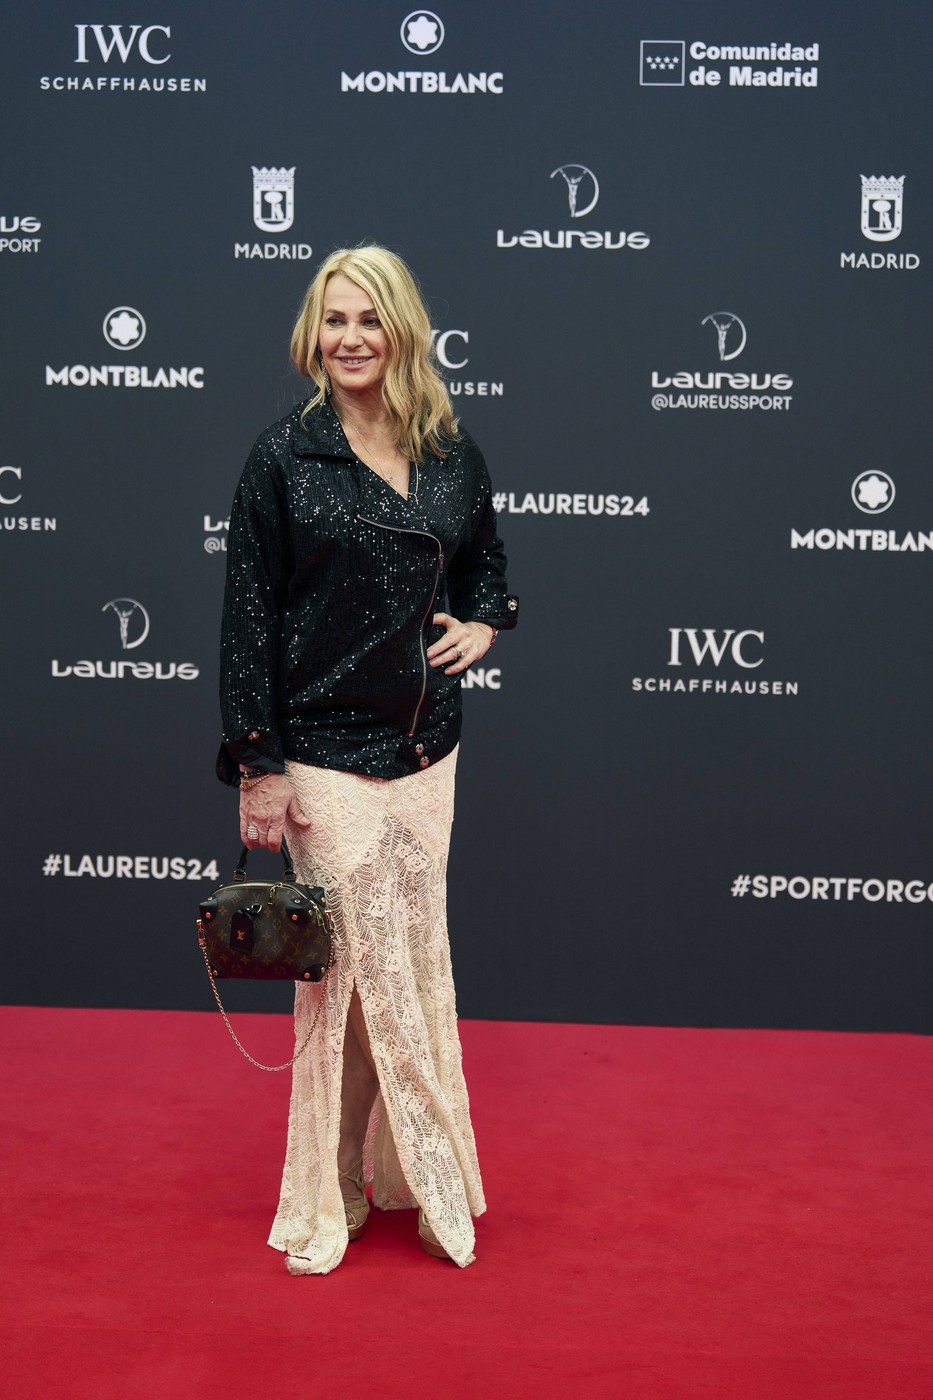 Laureus World Sports Awards Madrid 2024 - Red Carpet Nadia Comaneci attends Laureus World Sports Awards Madrid 2024 - Red Carpet at Palacio de Cibeles on April 22, 2024 in Madrid, Spain Photo by IMAGO/MPG Madrid Palacio de Cibeles Madrid Spain Copyright: xMPGx,Image: 867113773, License: Rights-managed, Restrictions: PUBLICATIONxNOTxINxESPxNED, Credit images as 